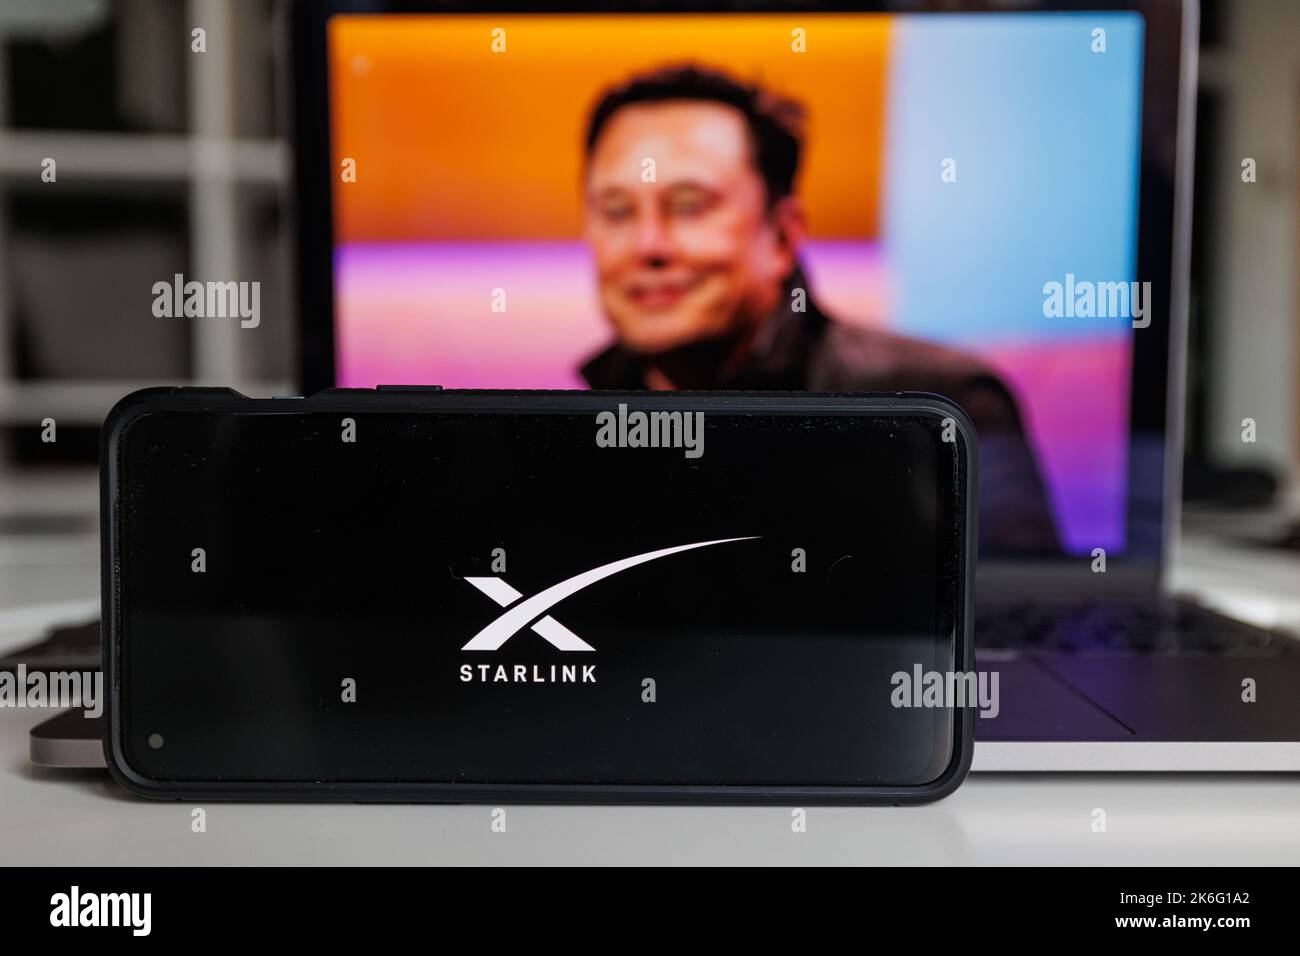 Kaunas, Lithuania - 14 October 2022: Starlink logo on screen and Elon Musk in background Stock Photo